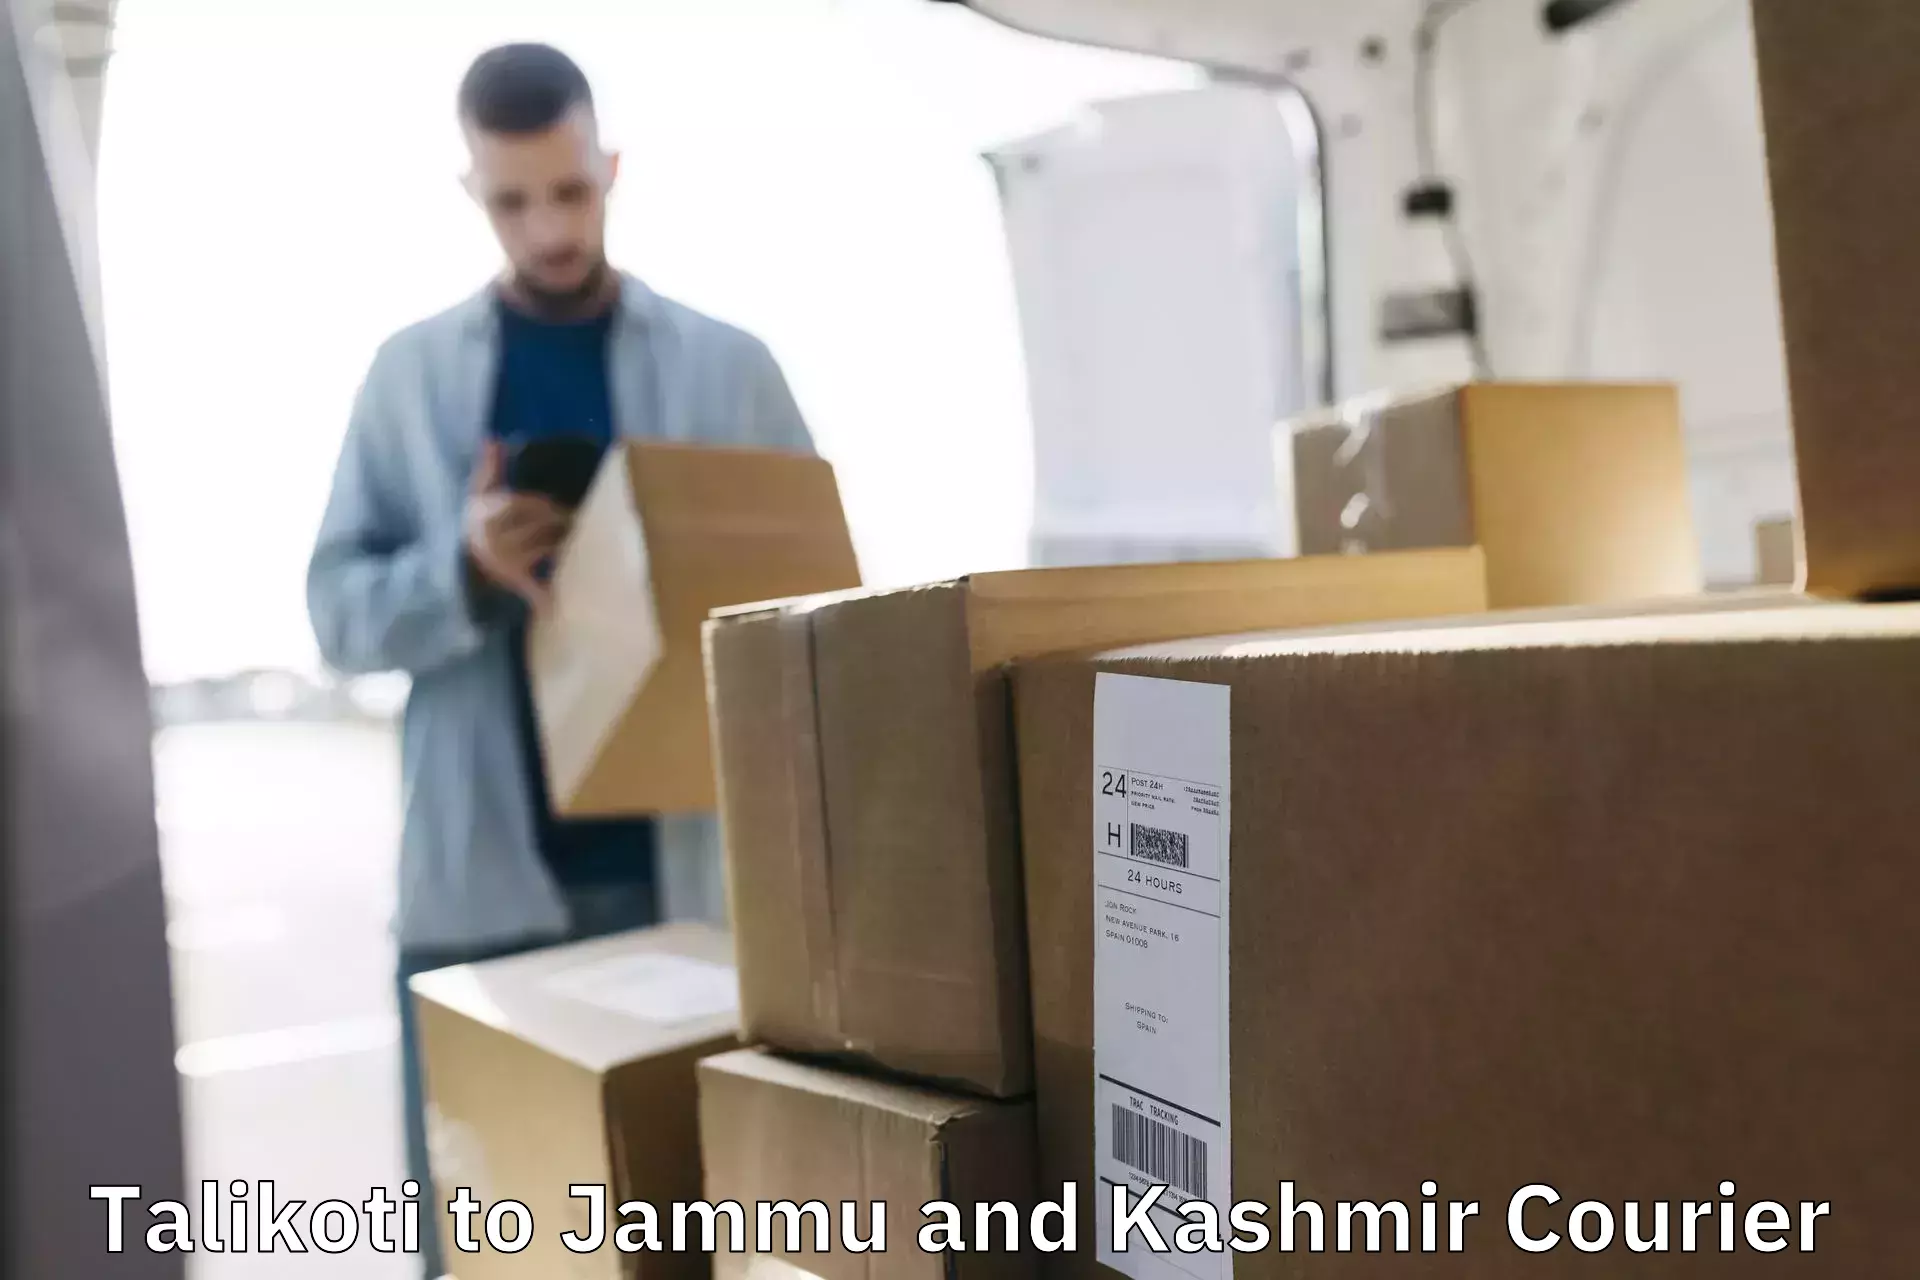 Full-service courier options Talikoti to Jammu and Kashmir